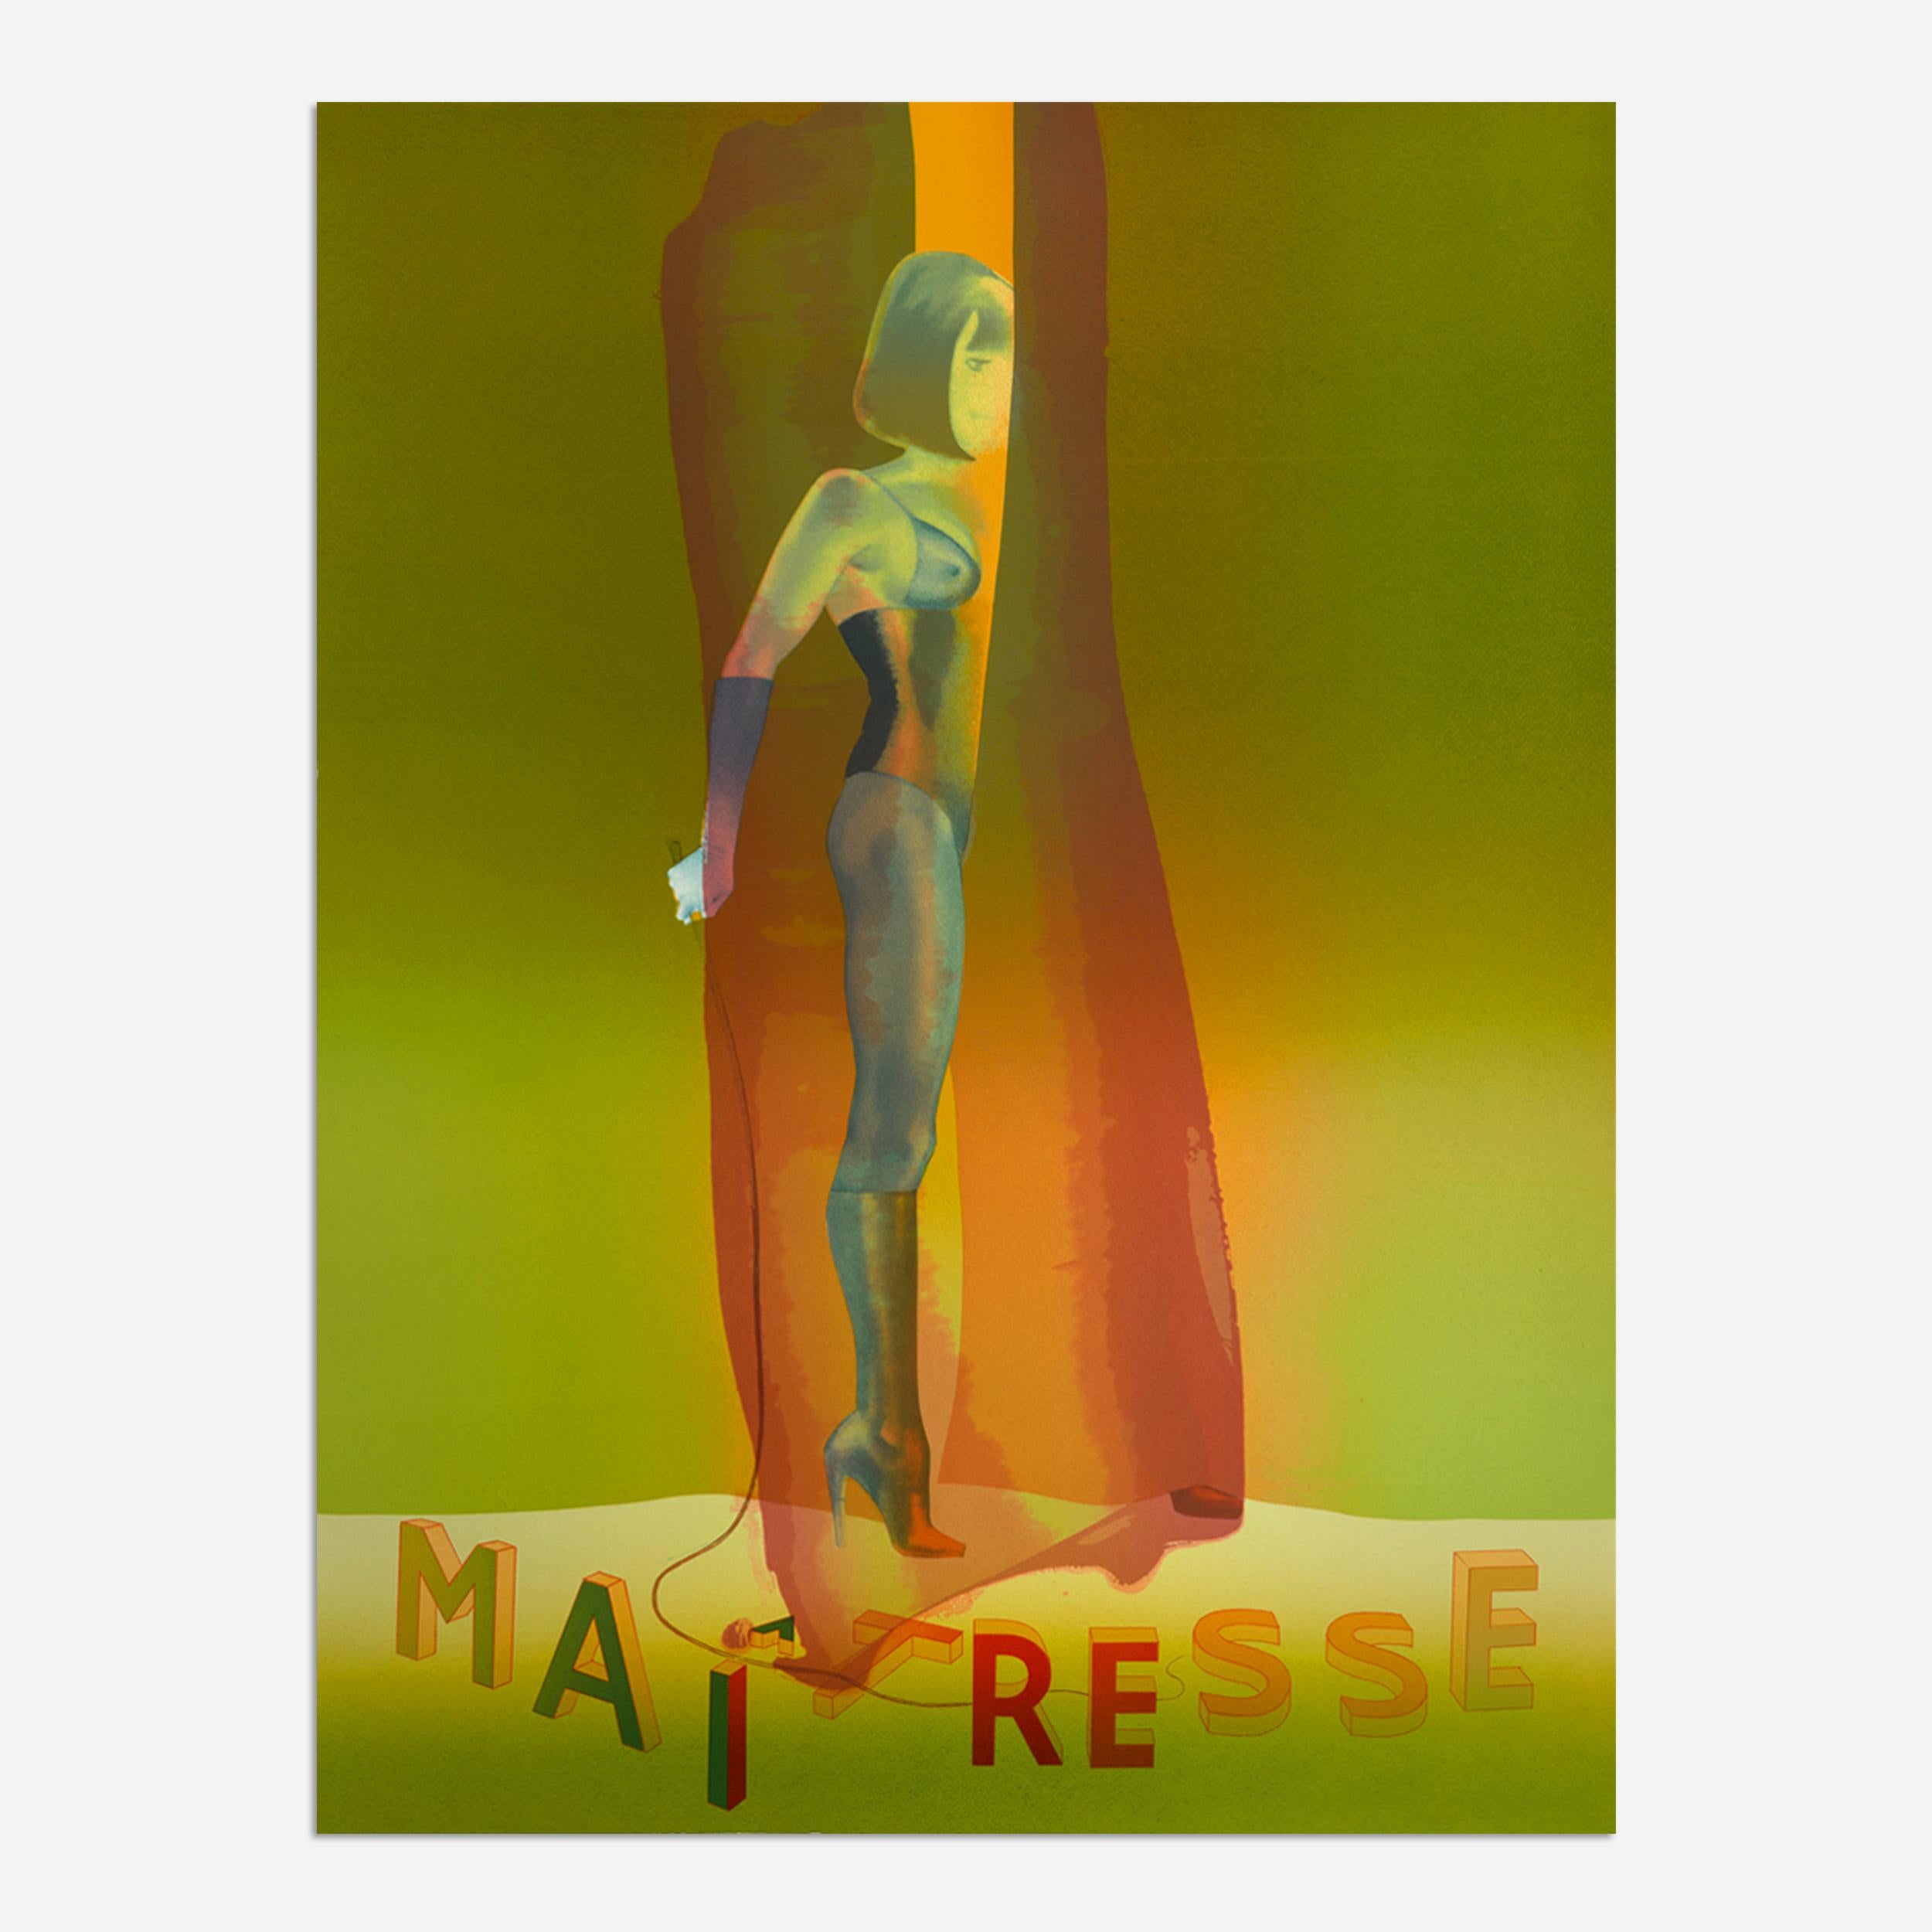 Allen Jones (British, b. 1937)
What If / Maîtresse Folio Screenprint II, 2016
Medium: Screenprint in 40 colors, on Bockingford 400 gsm
Dimensions: 106 x 80 cm (41 x 31 in)
Edition of 40 + 8 AP: Hand signed and numbered
Condition: Mint